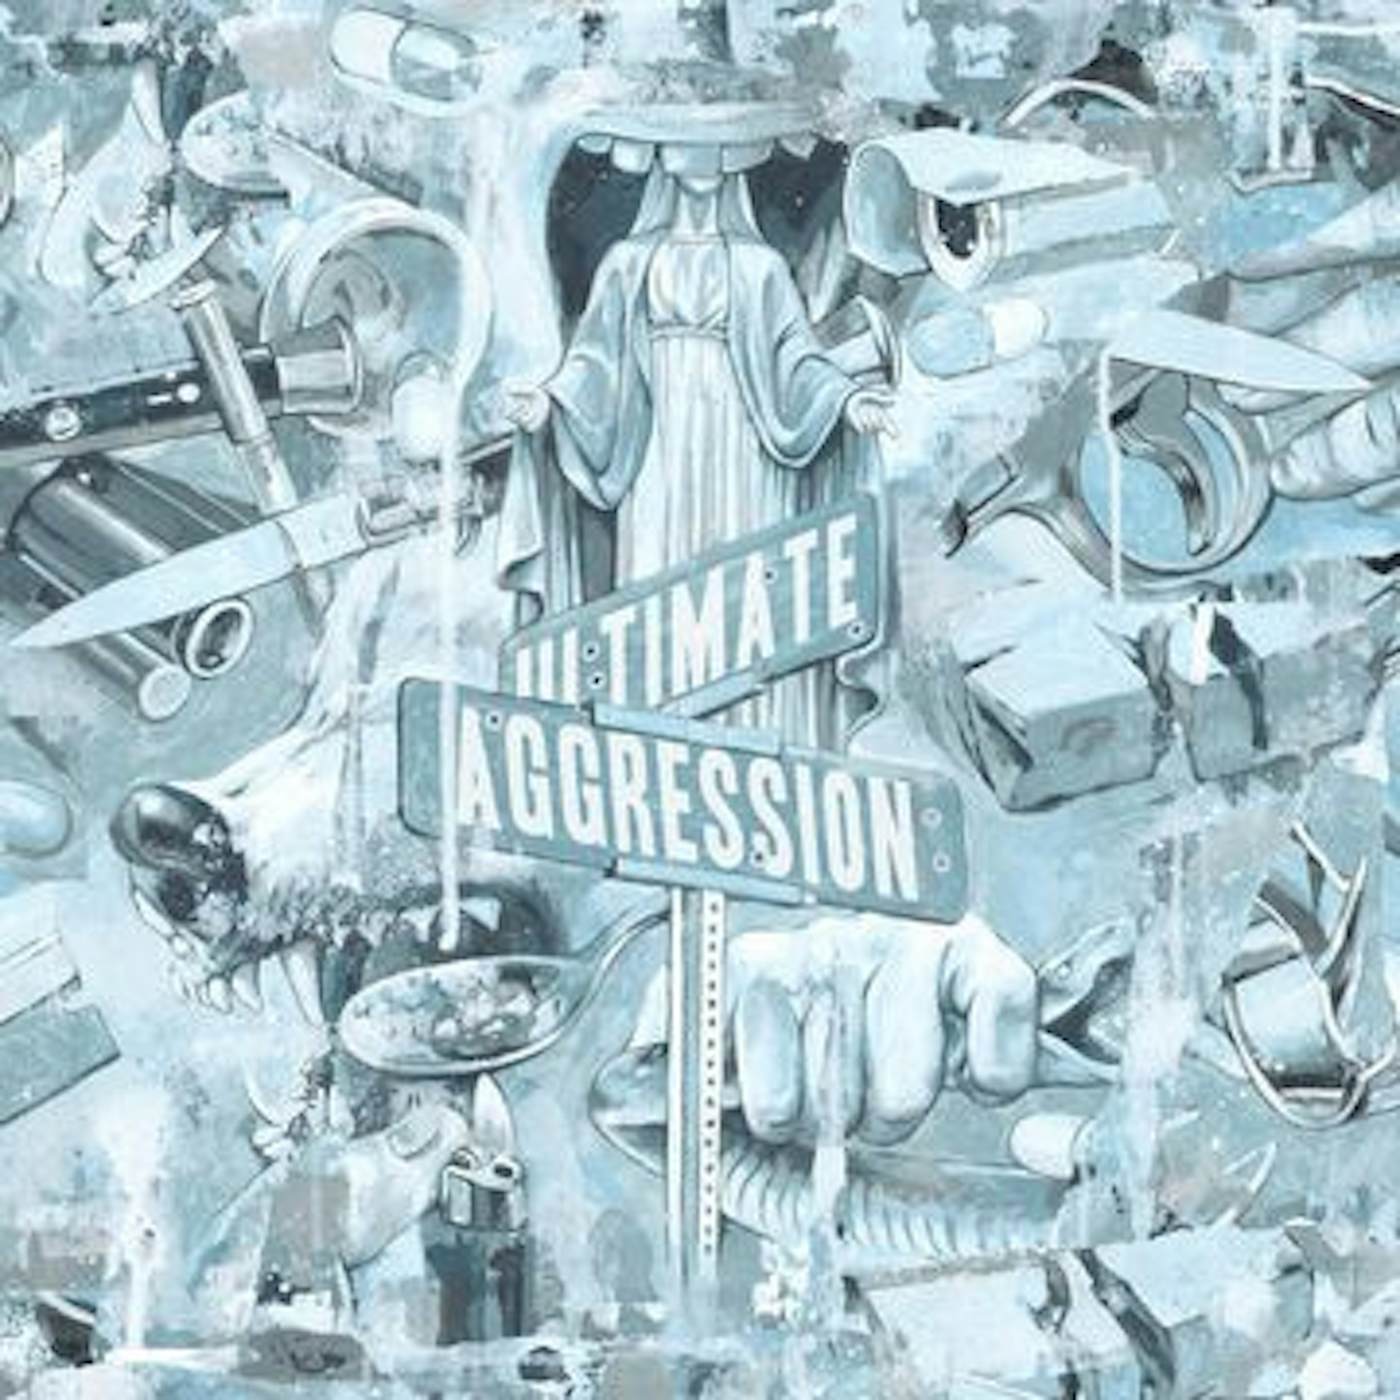 Year of the Knife Ultimate Aggression CD